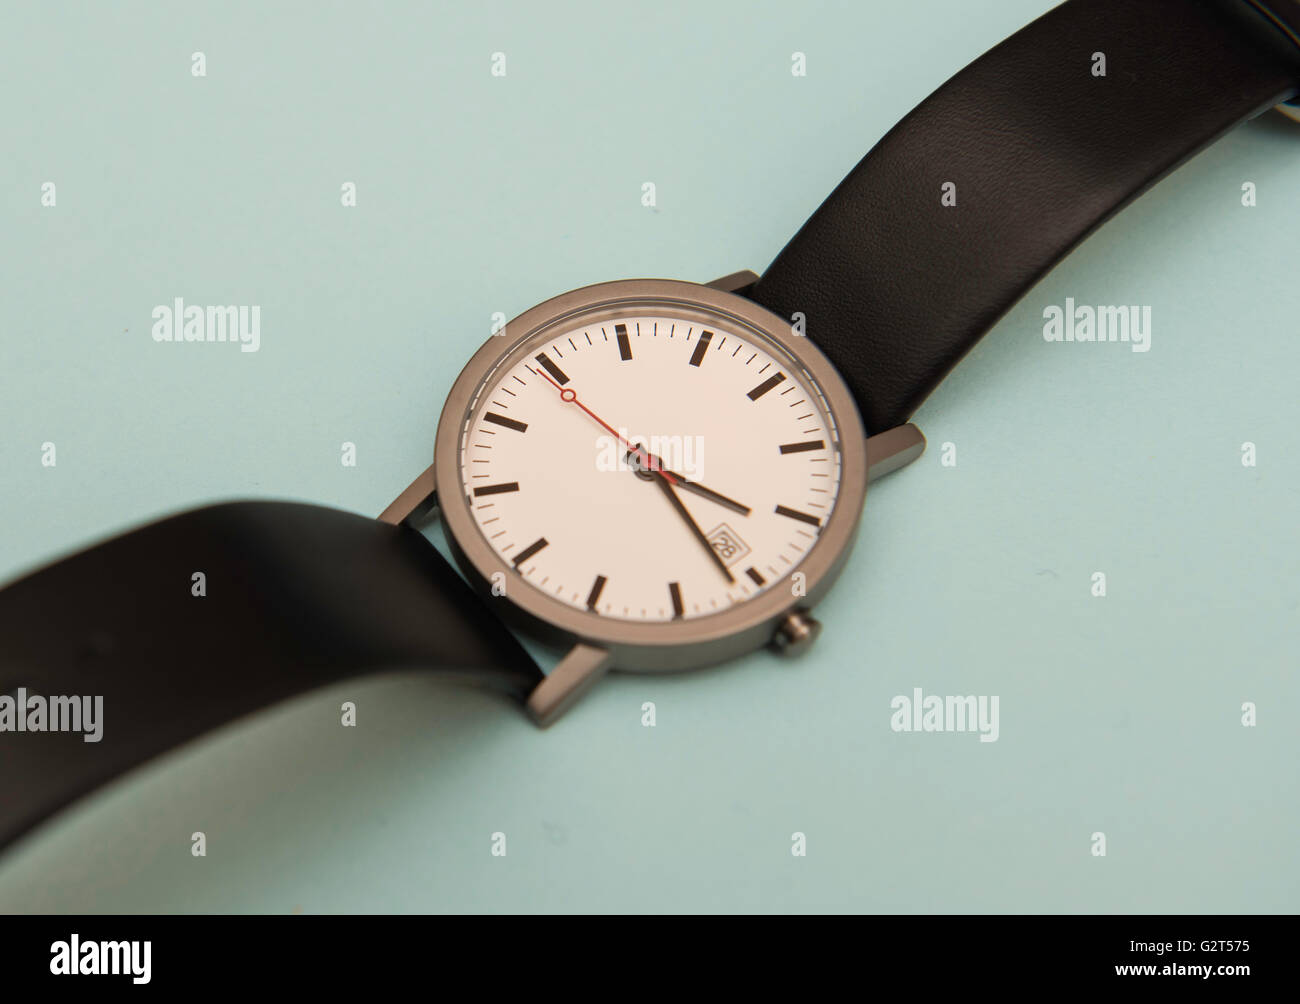 Men's watch with black leather strap Stock Photo